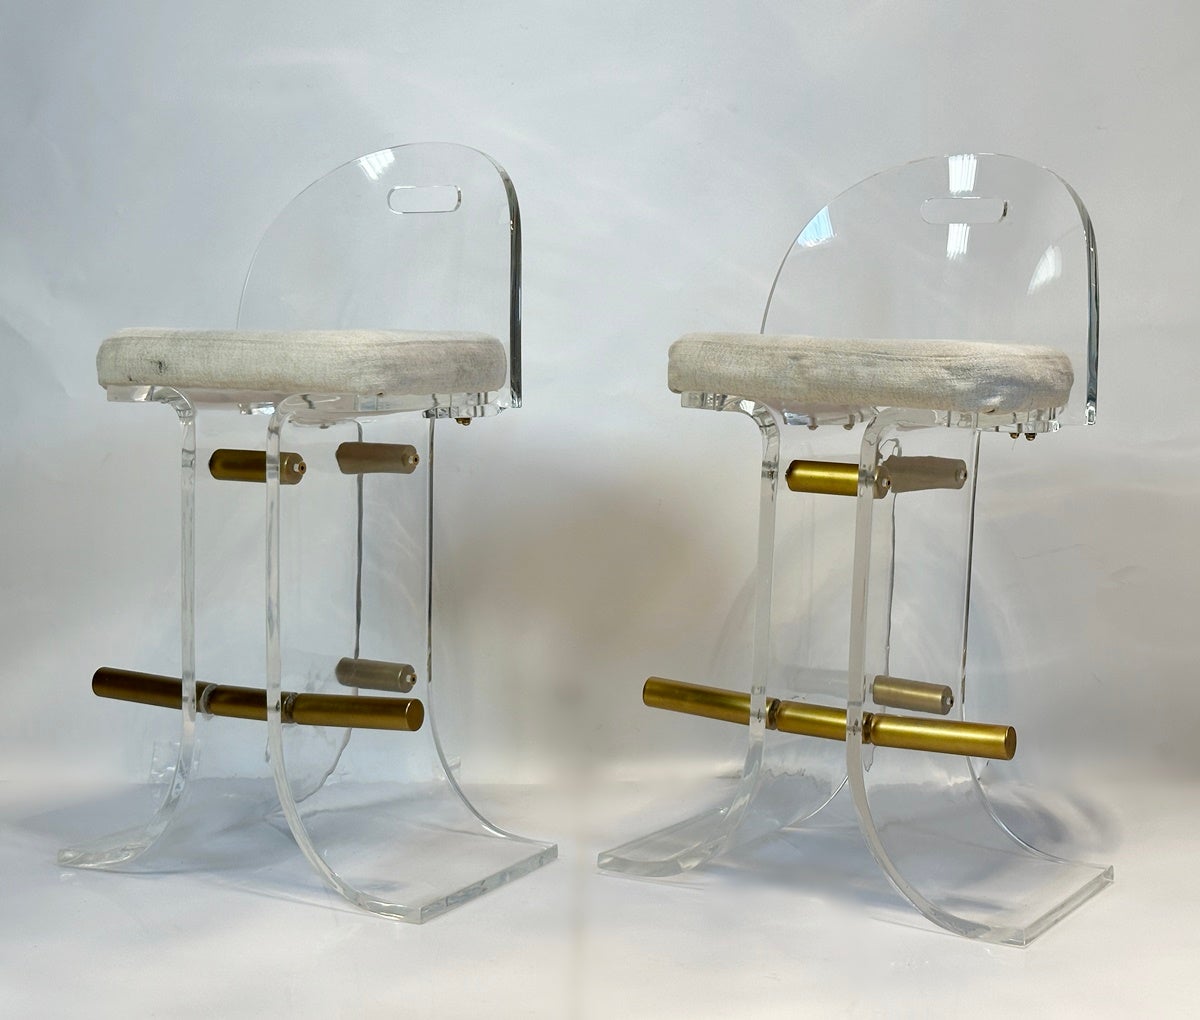 Introducing our exquisite Pair of Lucite & Brass Counter Stools by Hill Manufacturing, crafted in the USA during the stylish 1970s. These stunning stools effortlessly combine the elegance of Lucite and the opulence of brass, creating a truly